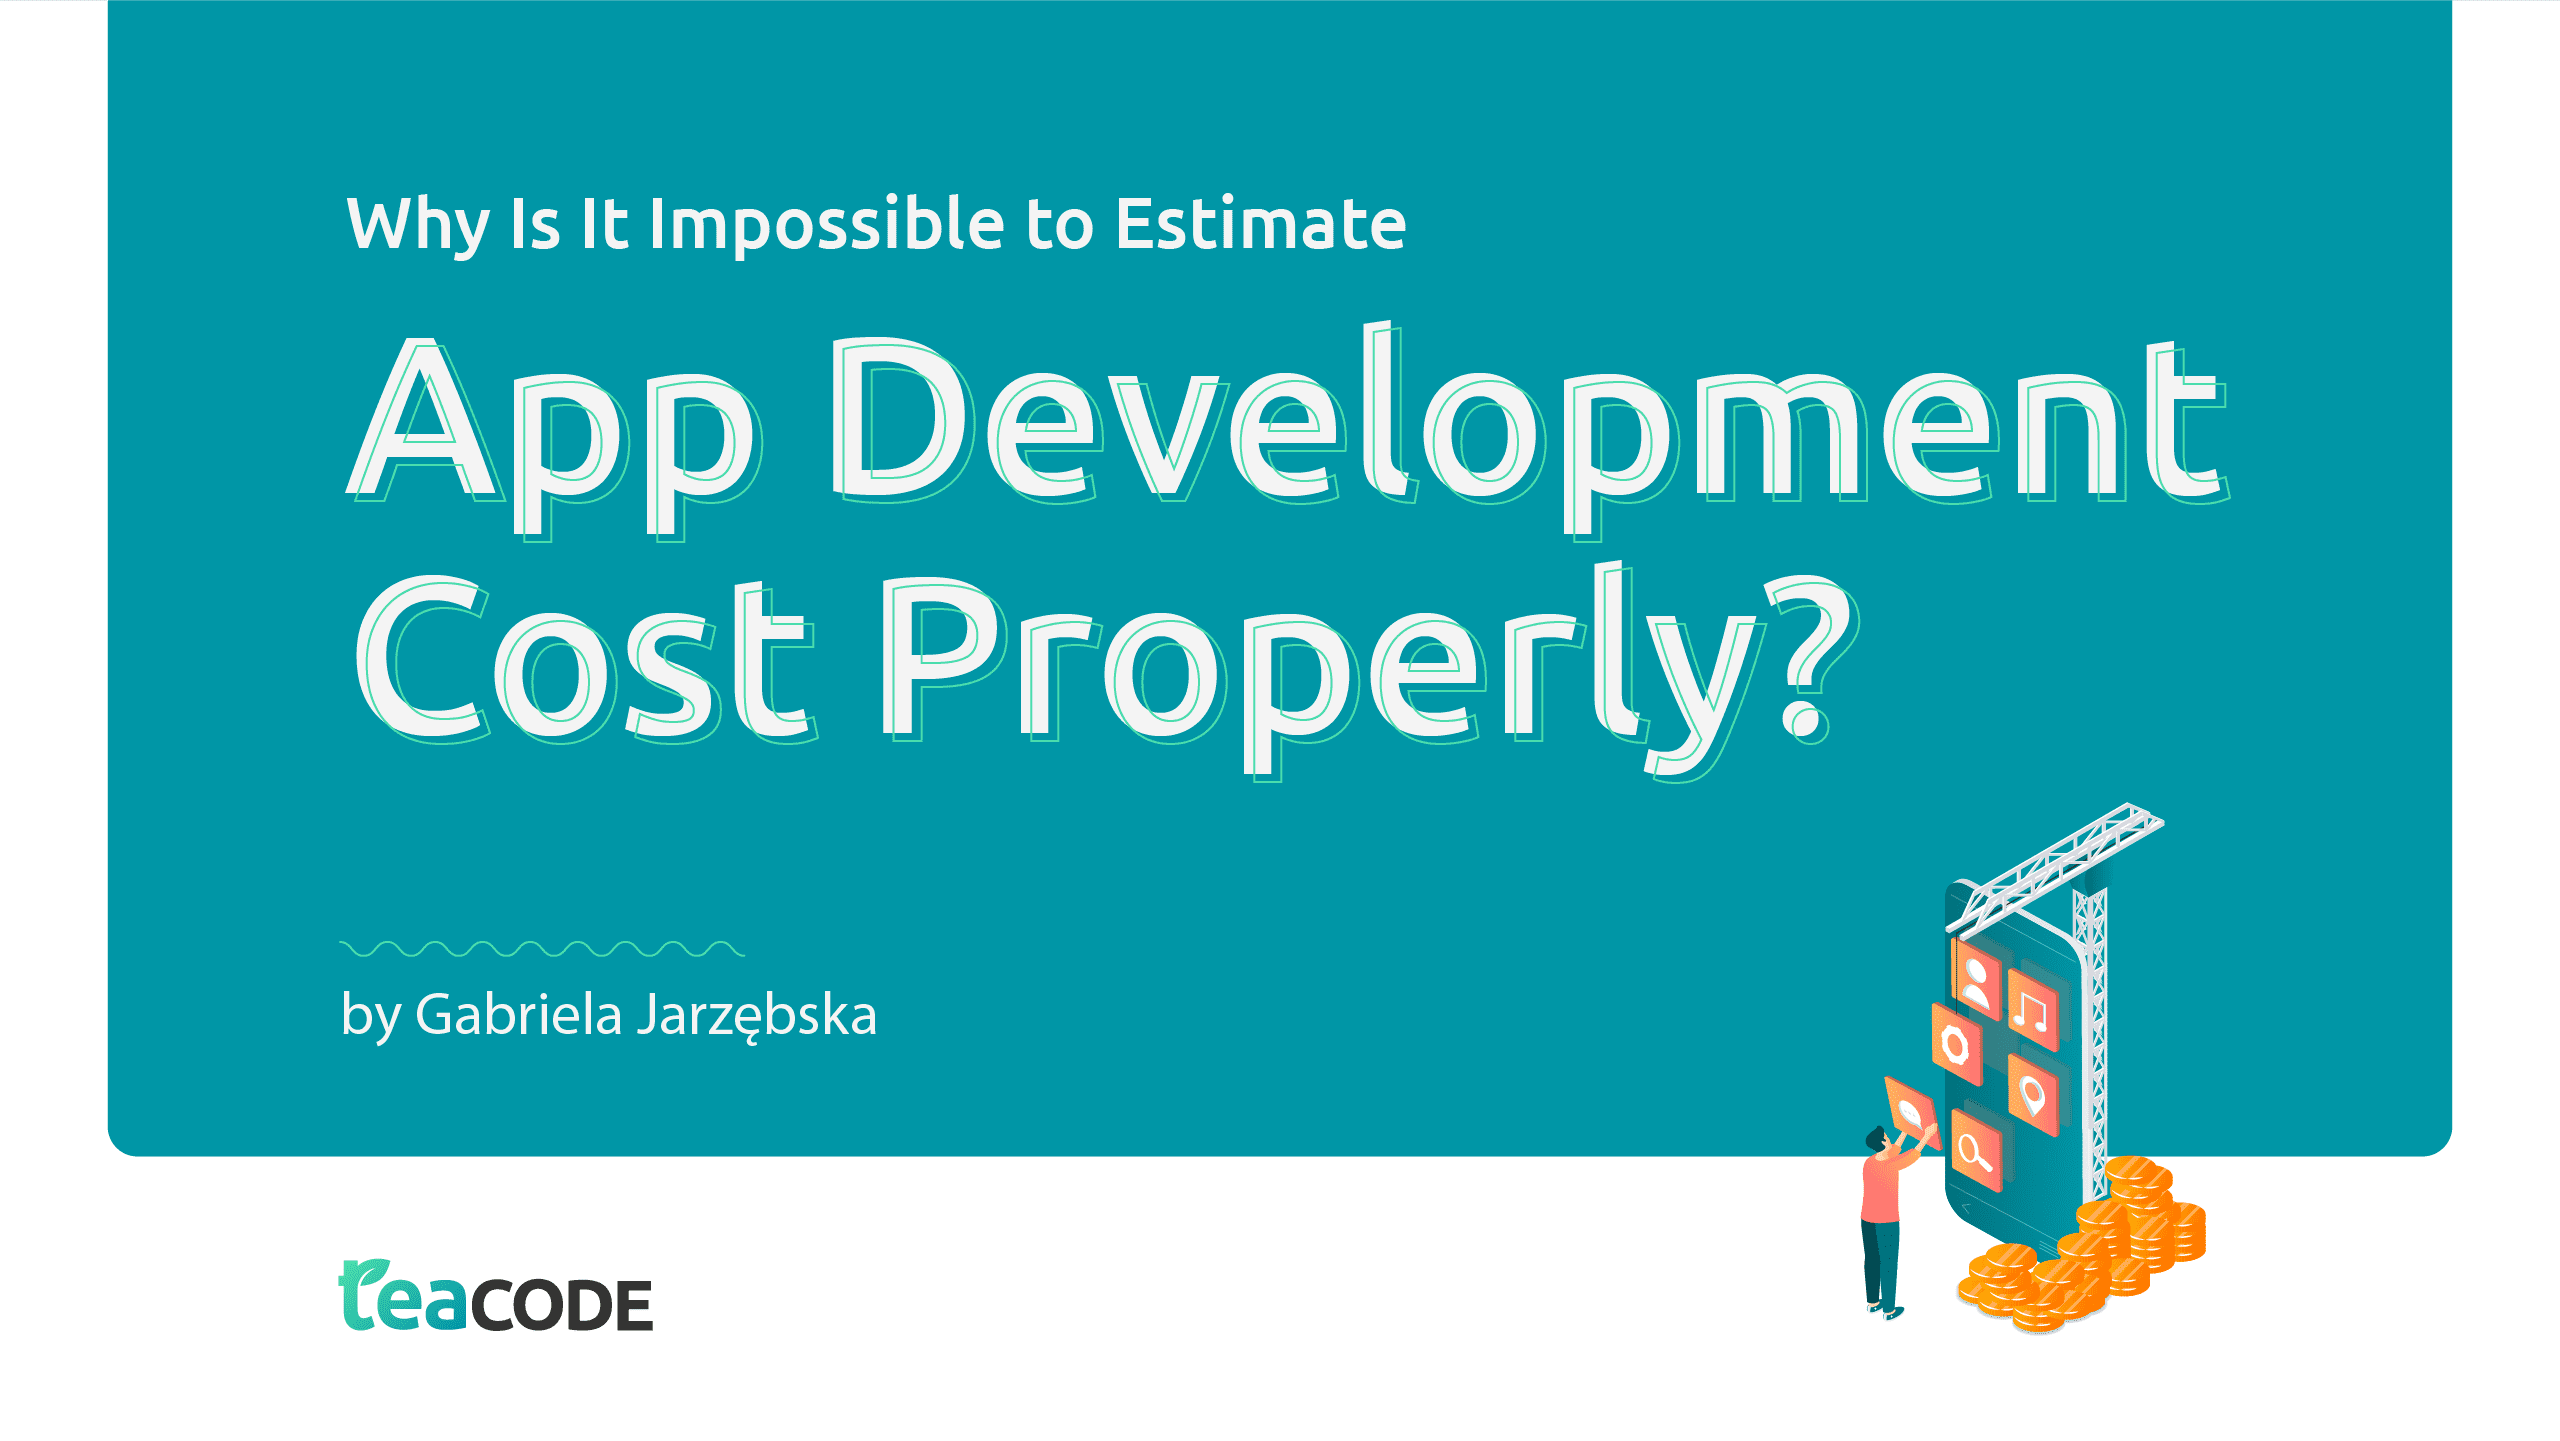 Why Is It Impossible to Estimate Software Development Costs Properly